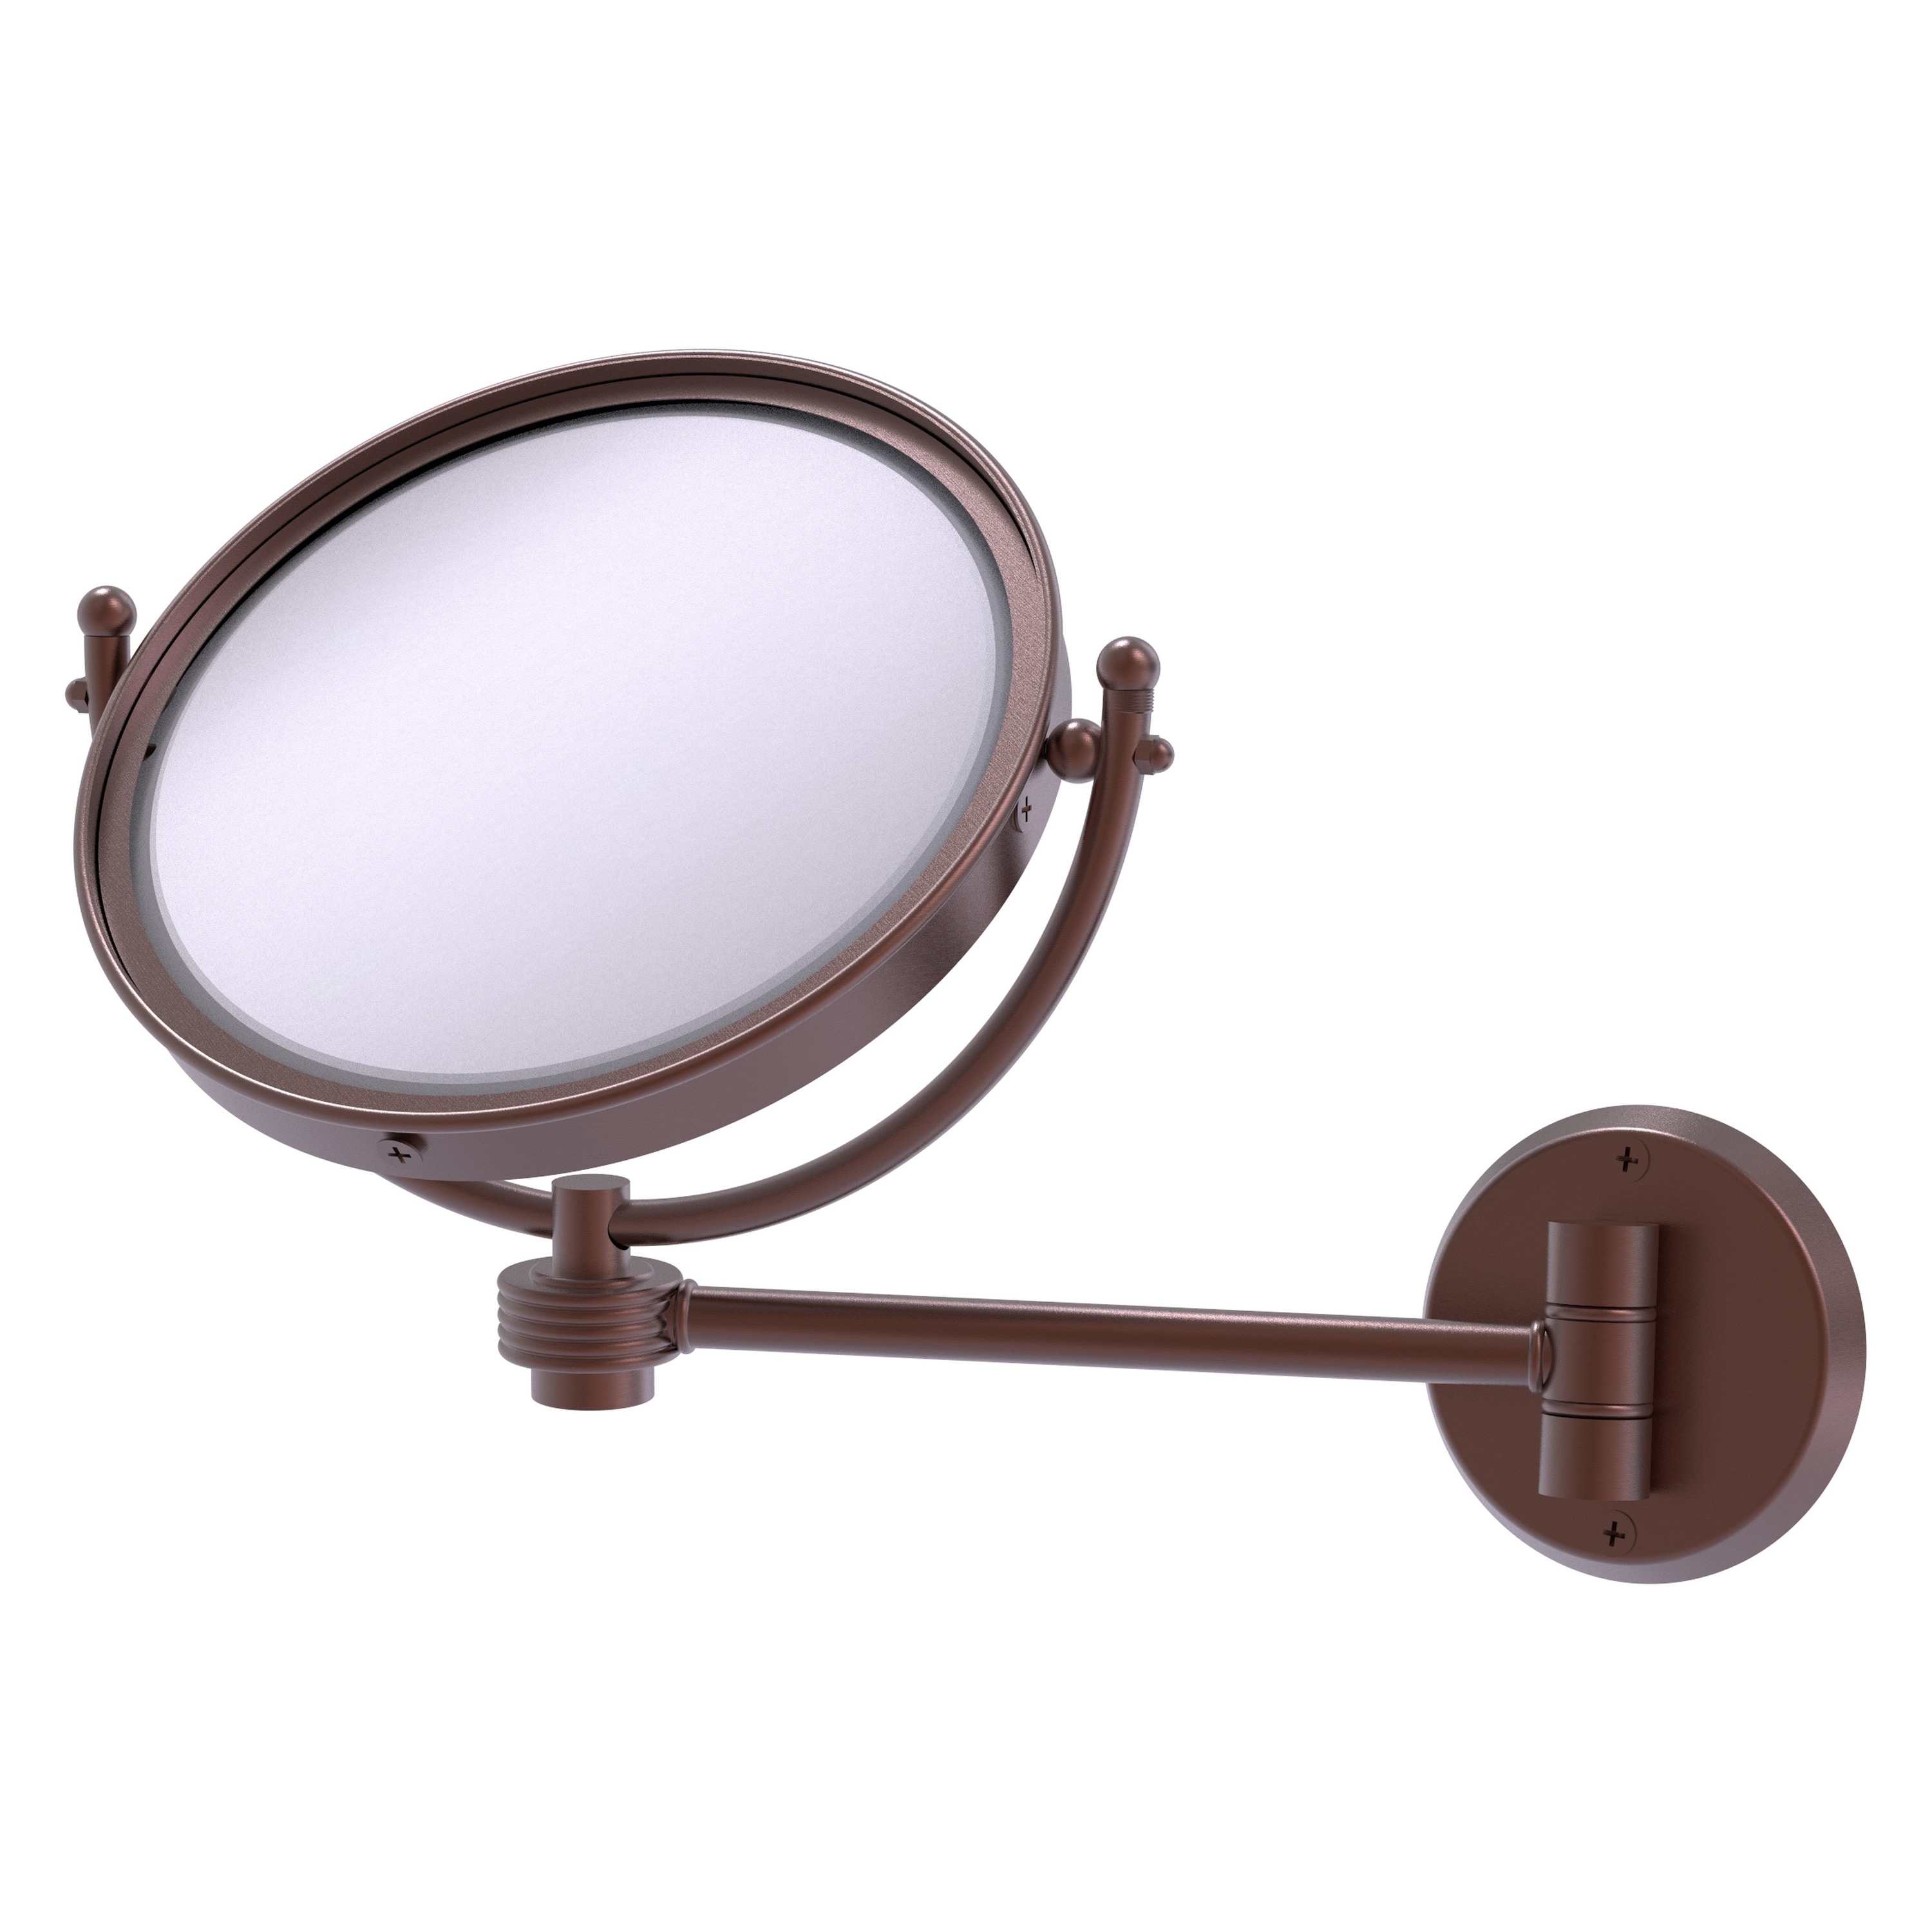 8-in x 10-in Antique Double-sided Magnifying Wall-mounted Vanity Mirror in Copper | - Allied Brass WM-5G/5X-CA